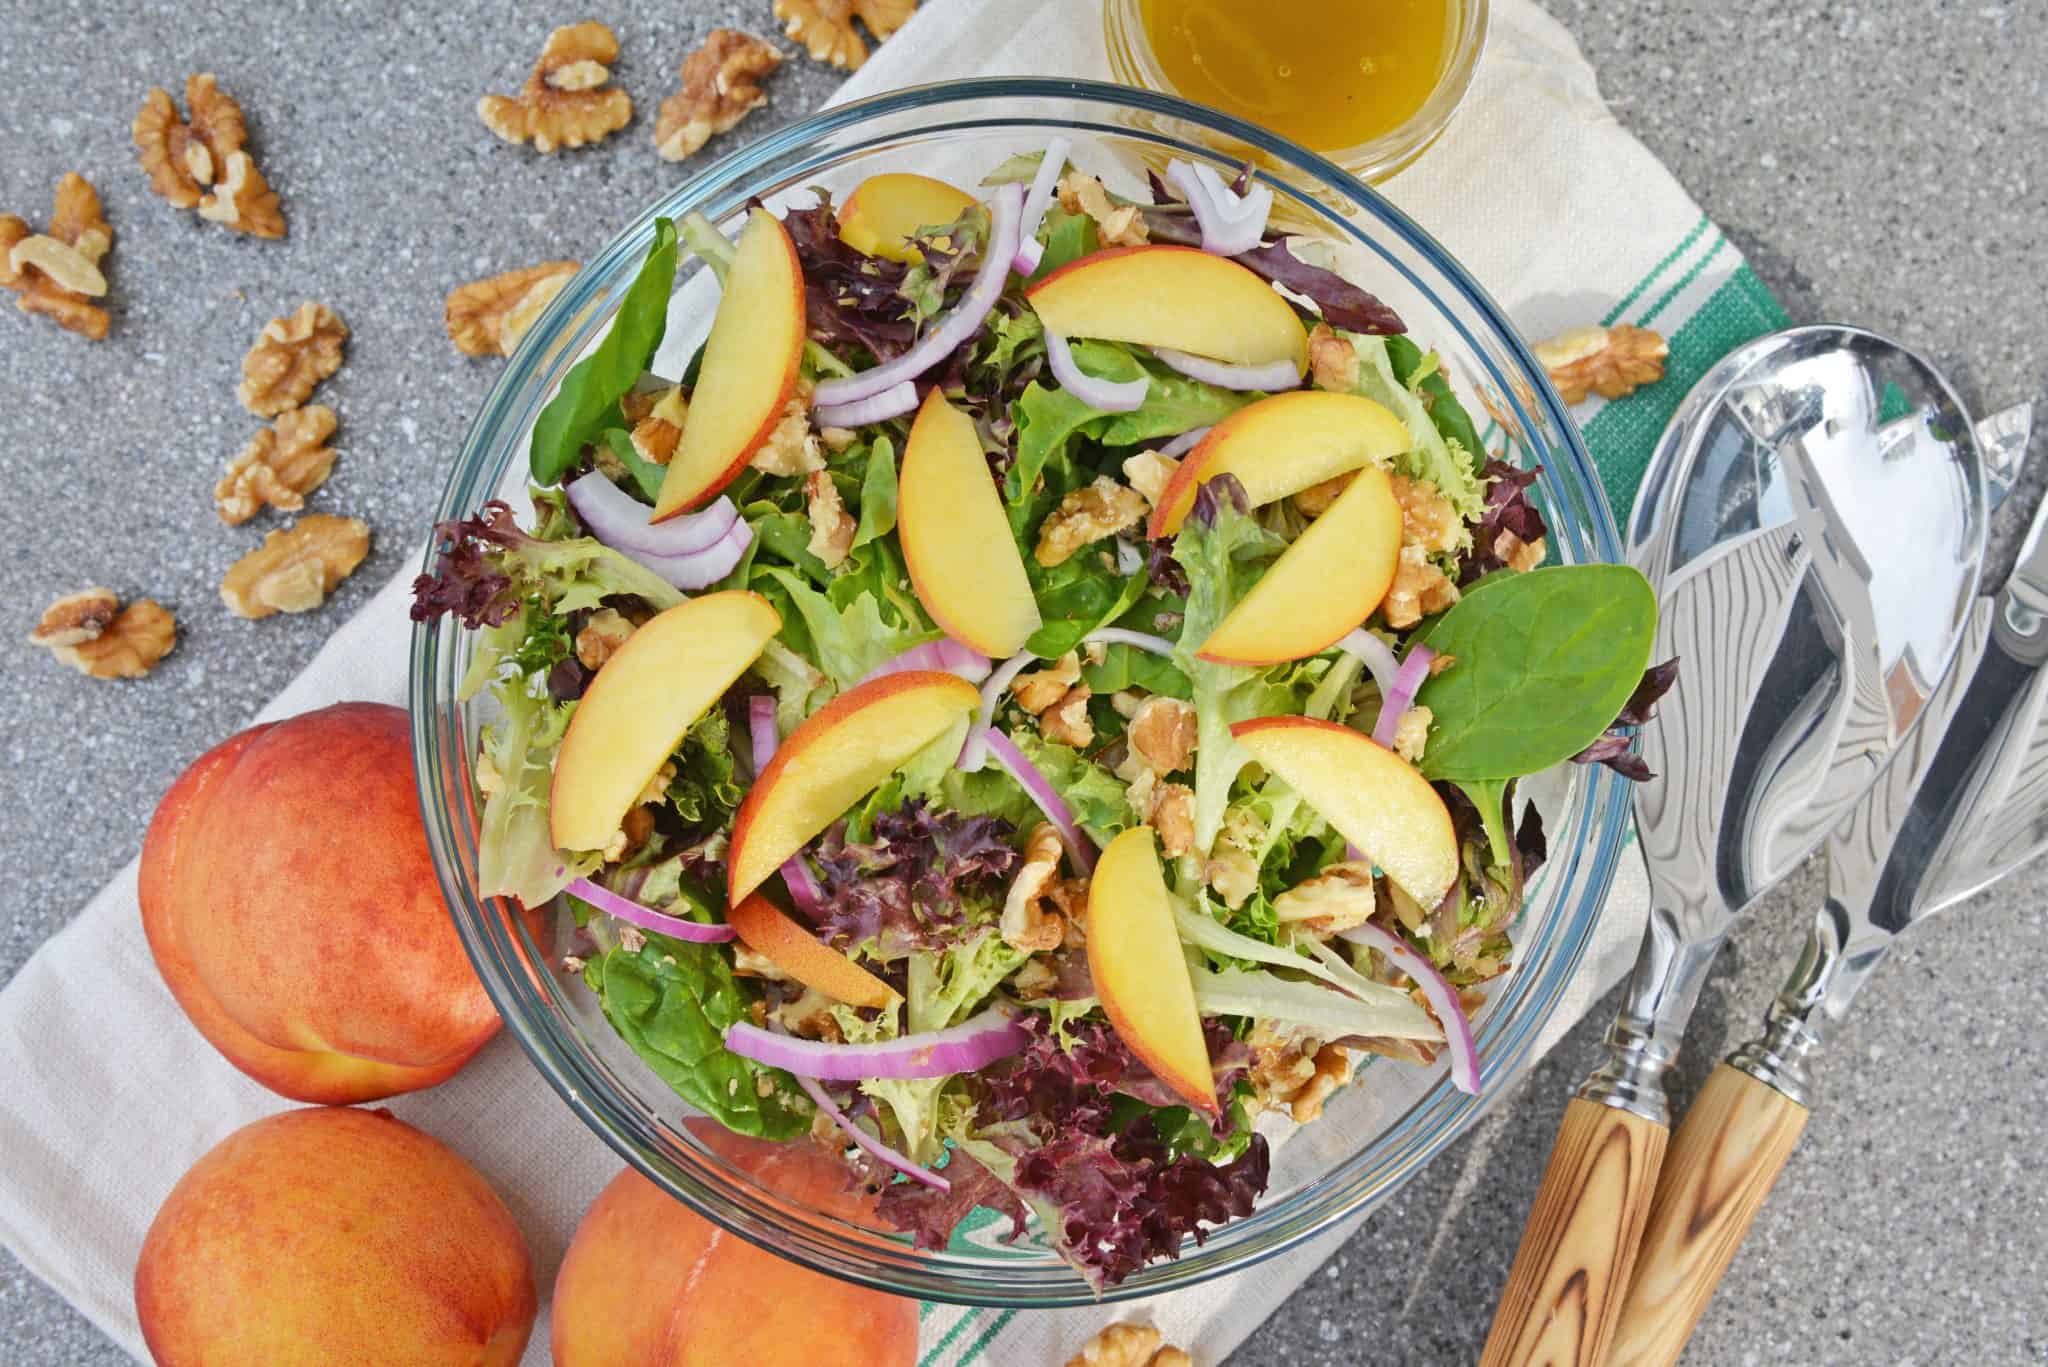 Peach Salad is a scrumptious summer salad filled with delicious peaches, gorgonzola cheese, shallots, candied walnuts and a tangy peach dressing. The perfect summer salad! #peachsalad #summersalads www.savoryexperiments.com